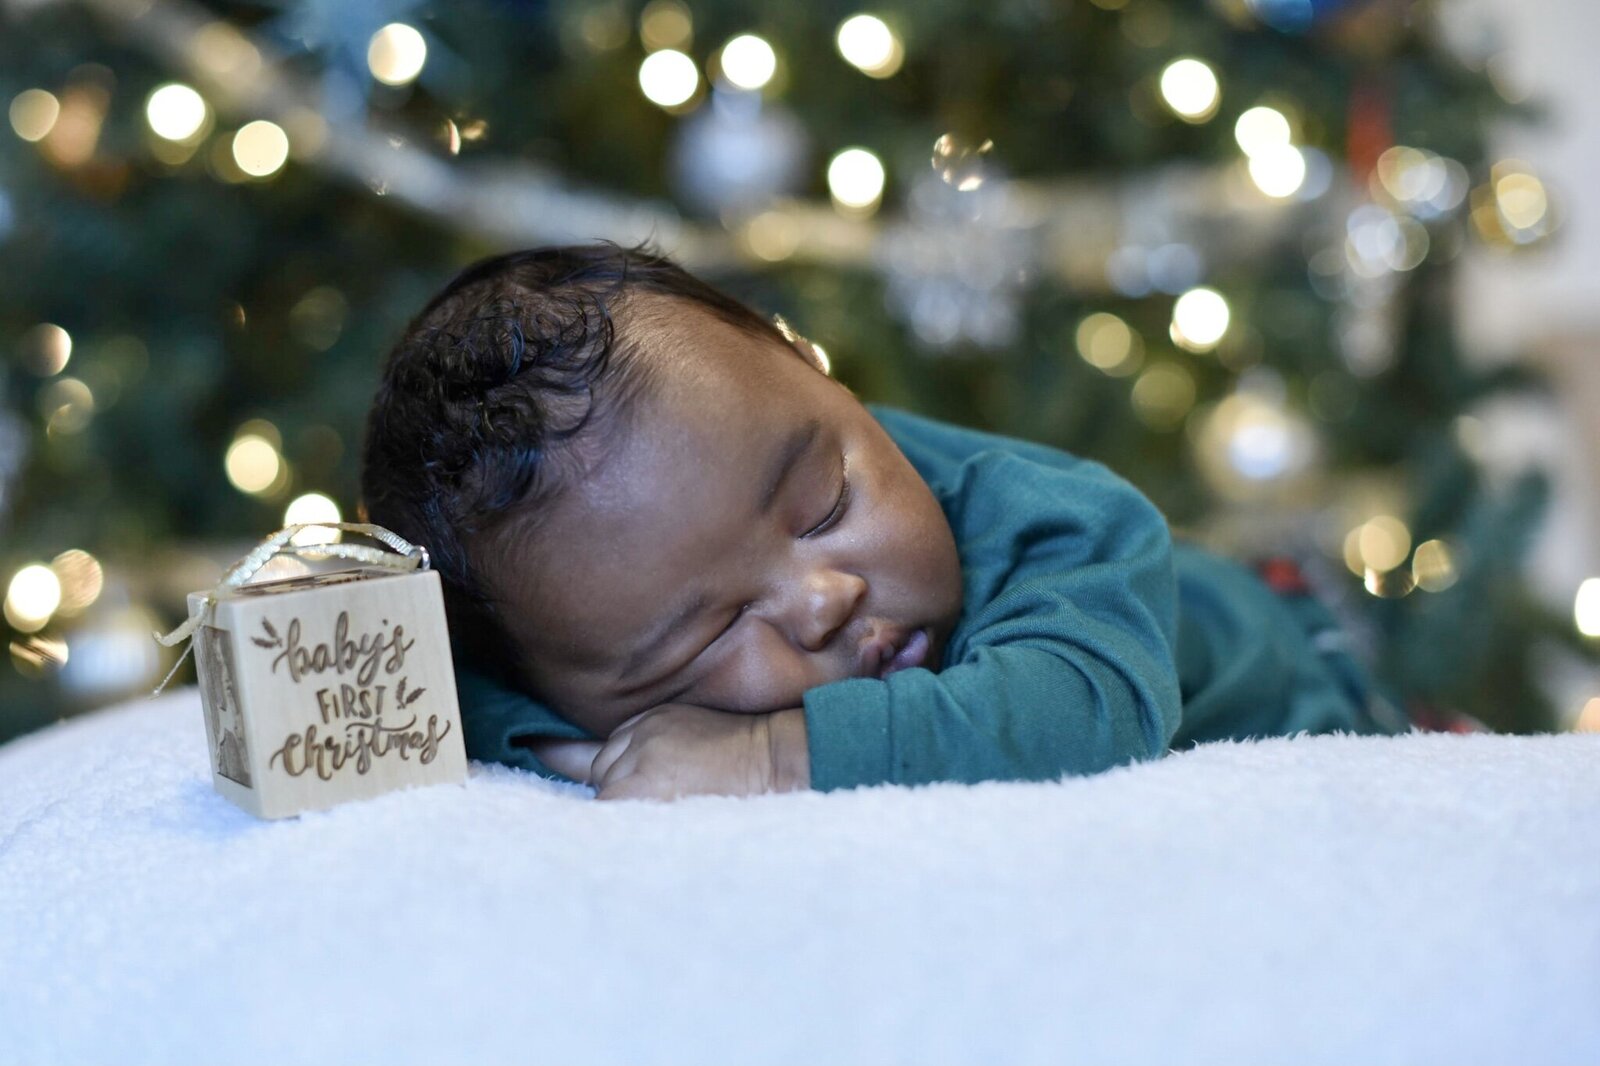 newborn baby sleeping under the christmas tree with an ornament that reads babys first christmas photographed by Millz Photography in Greenville, SC